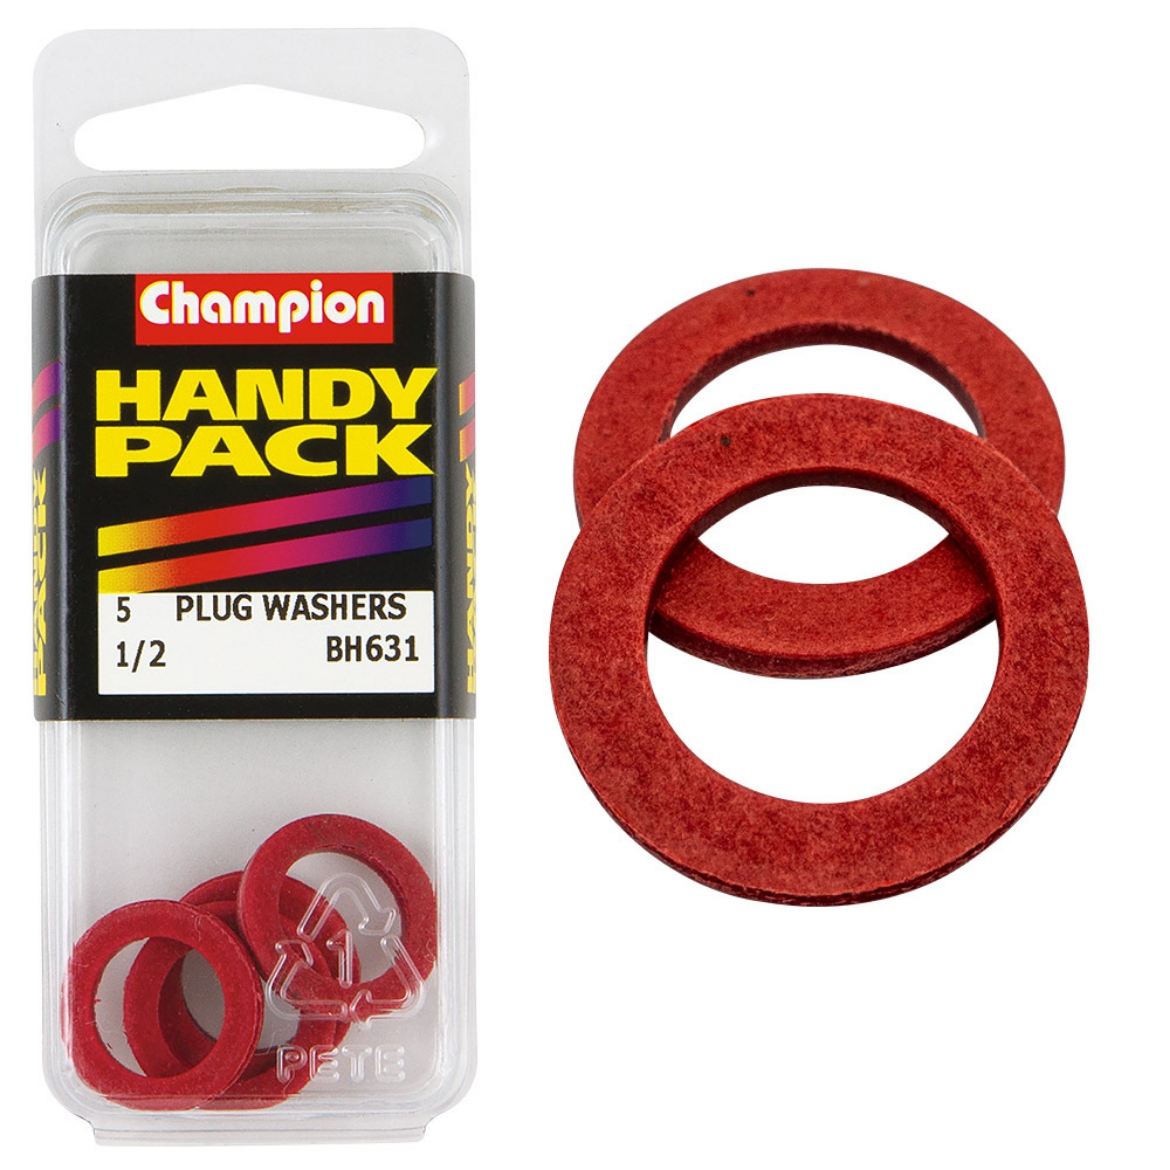 Picture of Handy Pk Drain Plug Washer suit #1 plug CFW (Pkt.5)